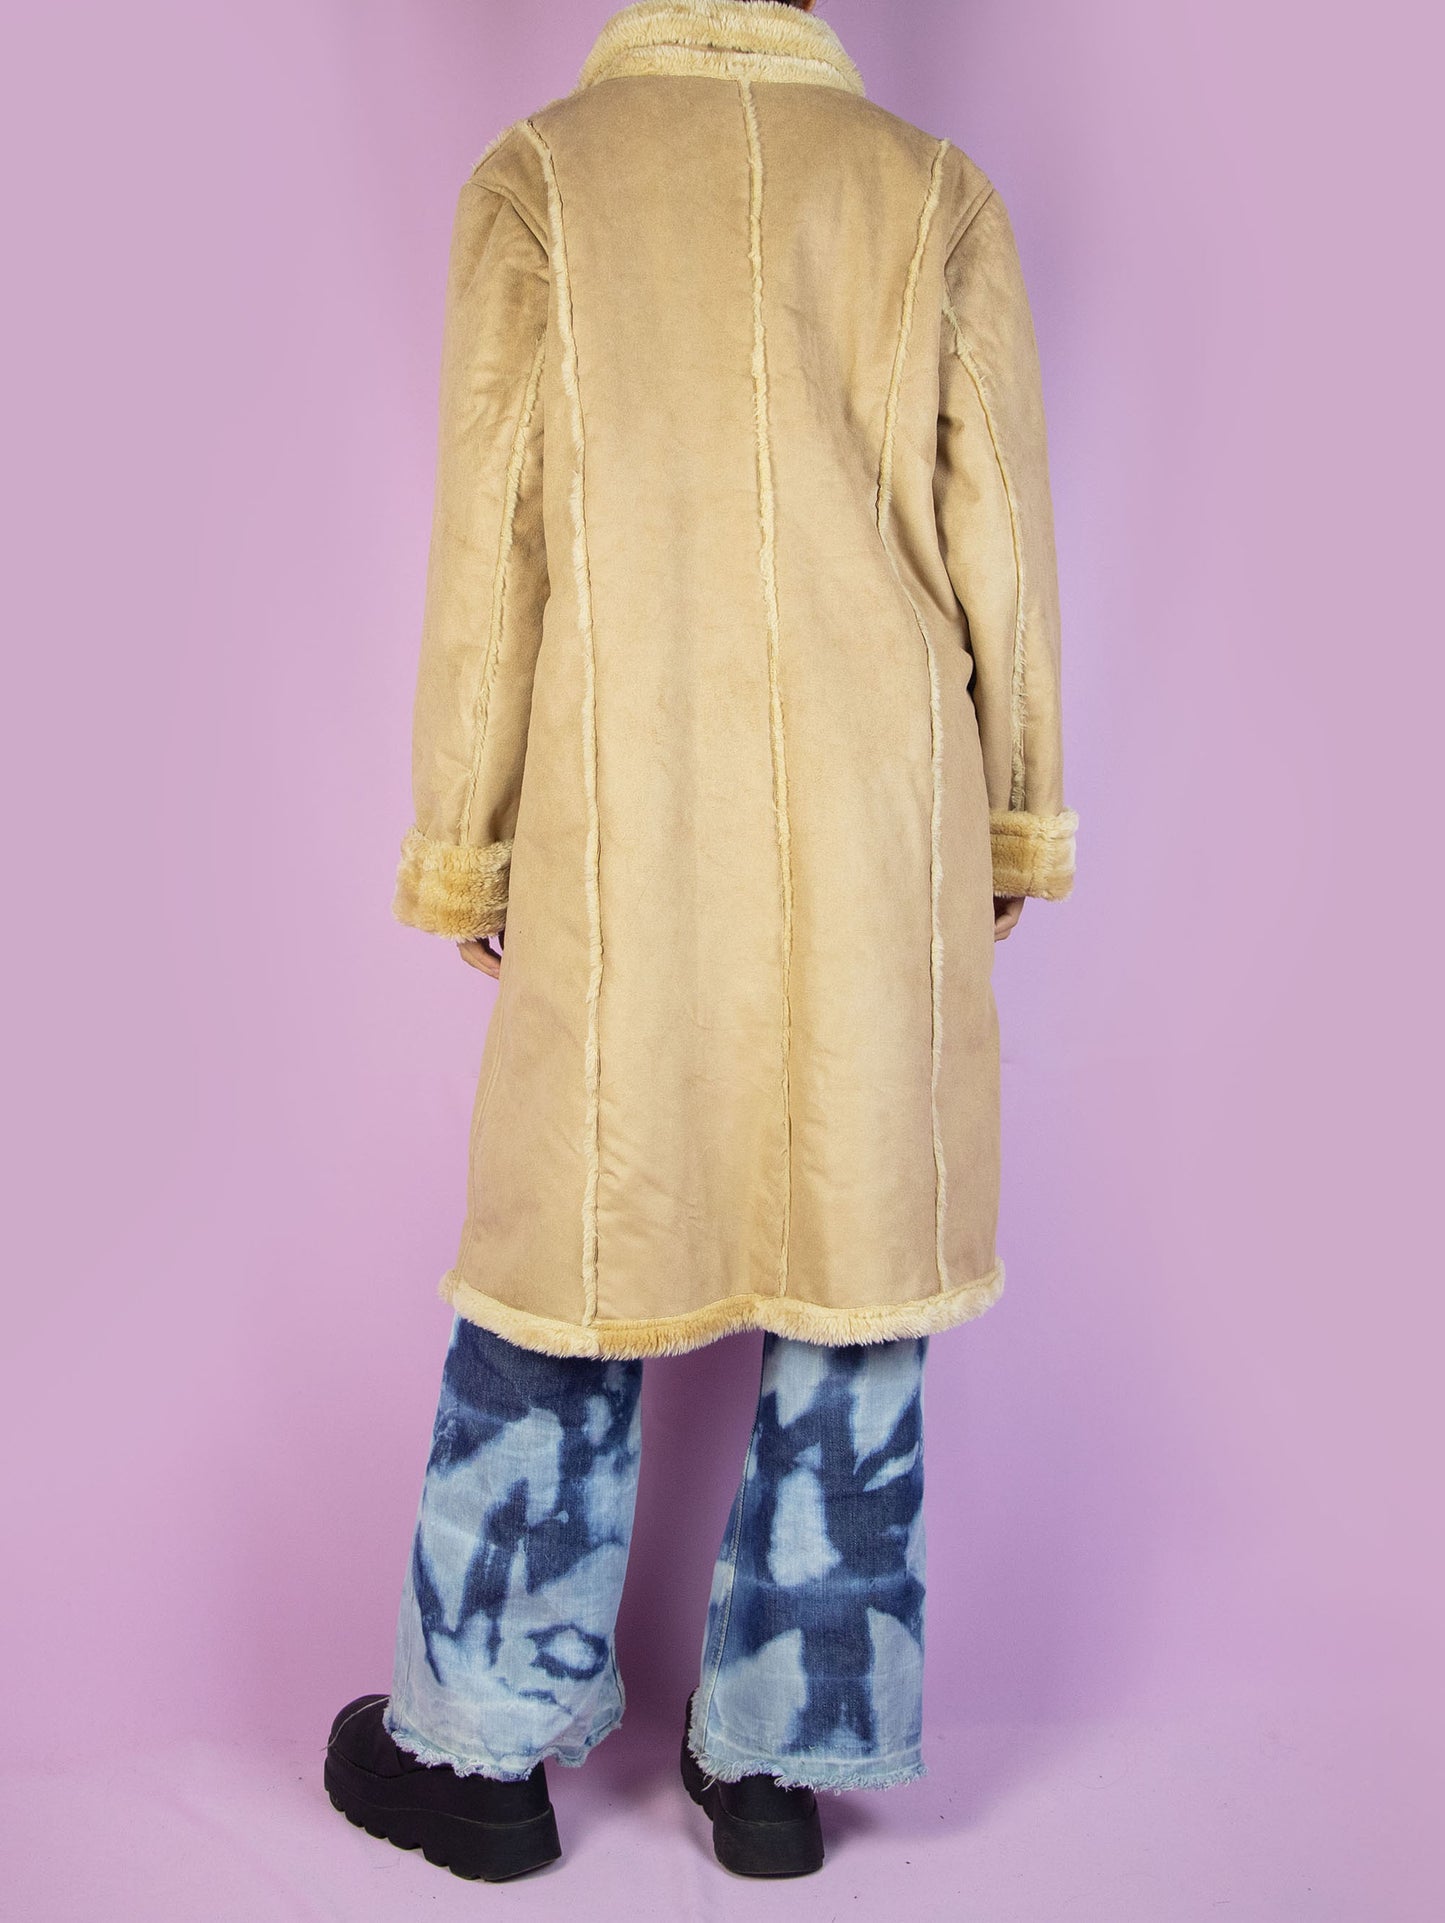 The Y2K Winter Suede Maxi Coat is a vintage 2000s light beige-brown faux suede long statement jacket with faux fur interior, collar, cuffs, pockets, and buttons.